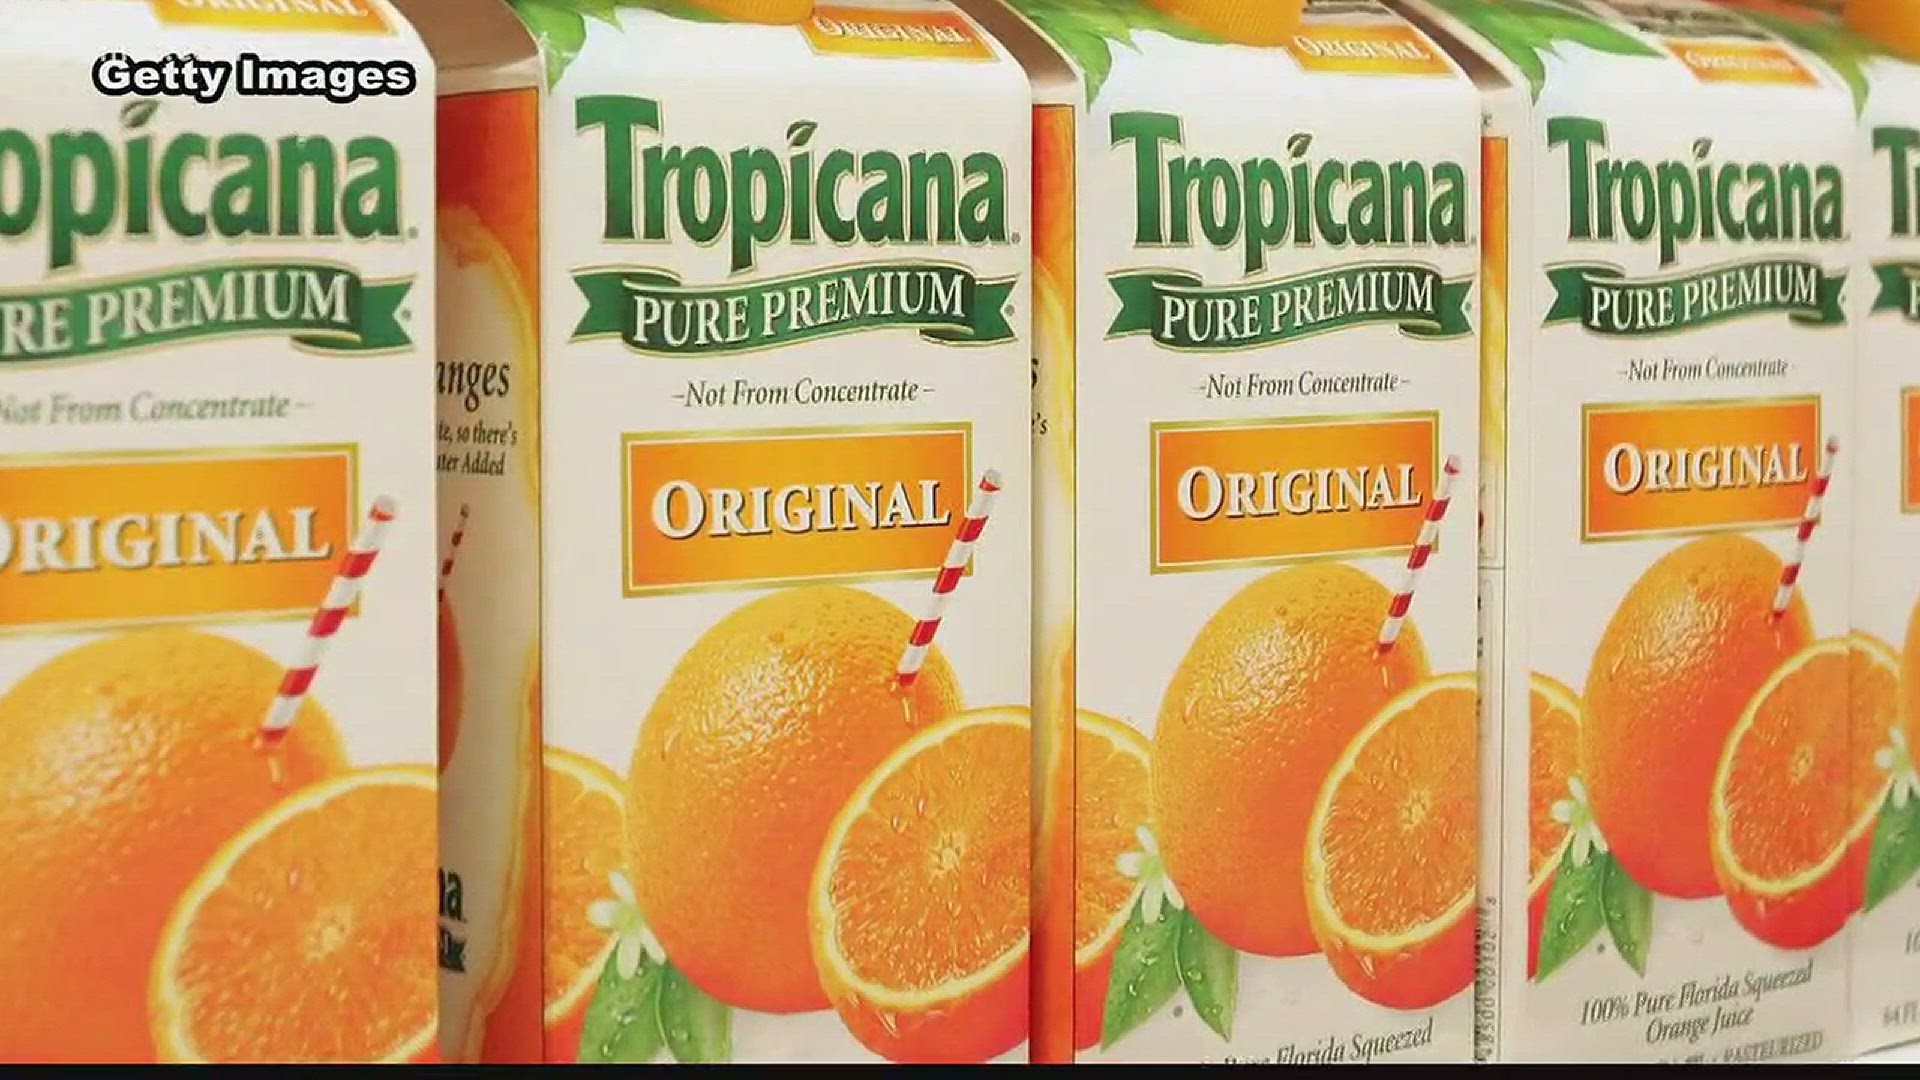 VERIFY: Will Tropicana pay you to advertise?